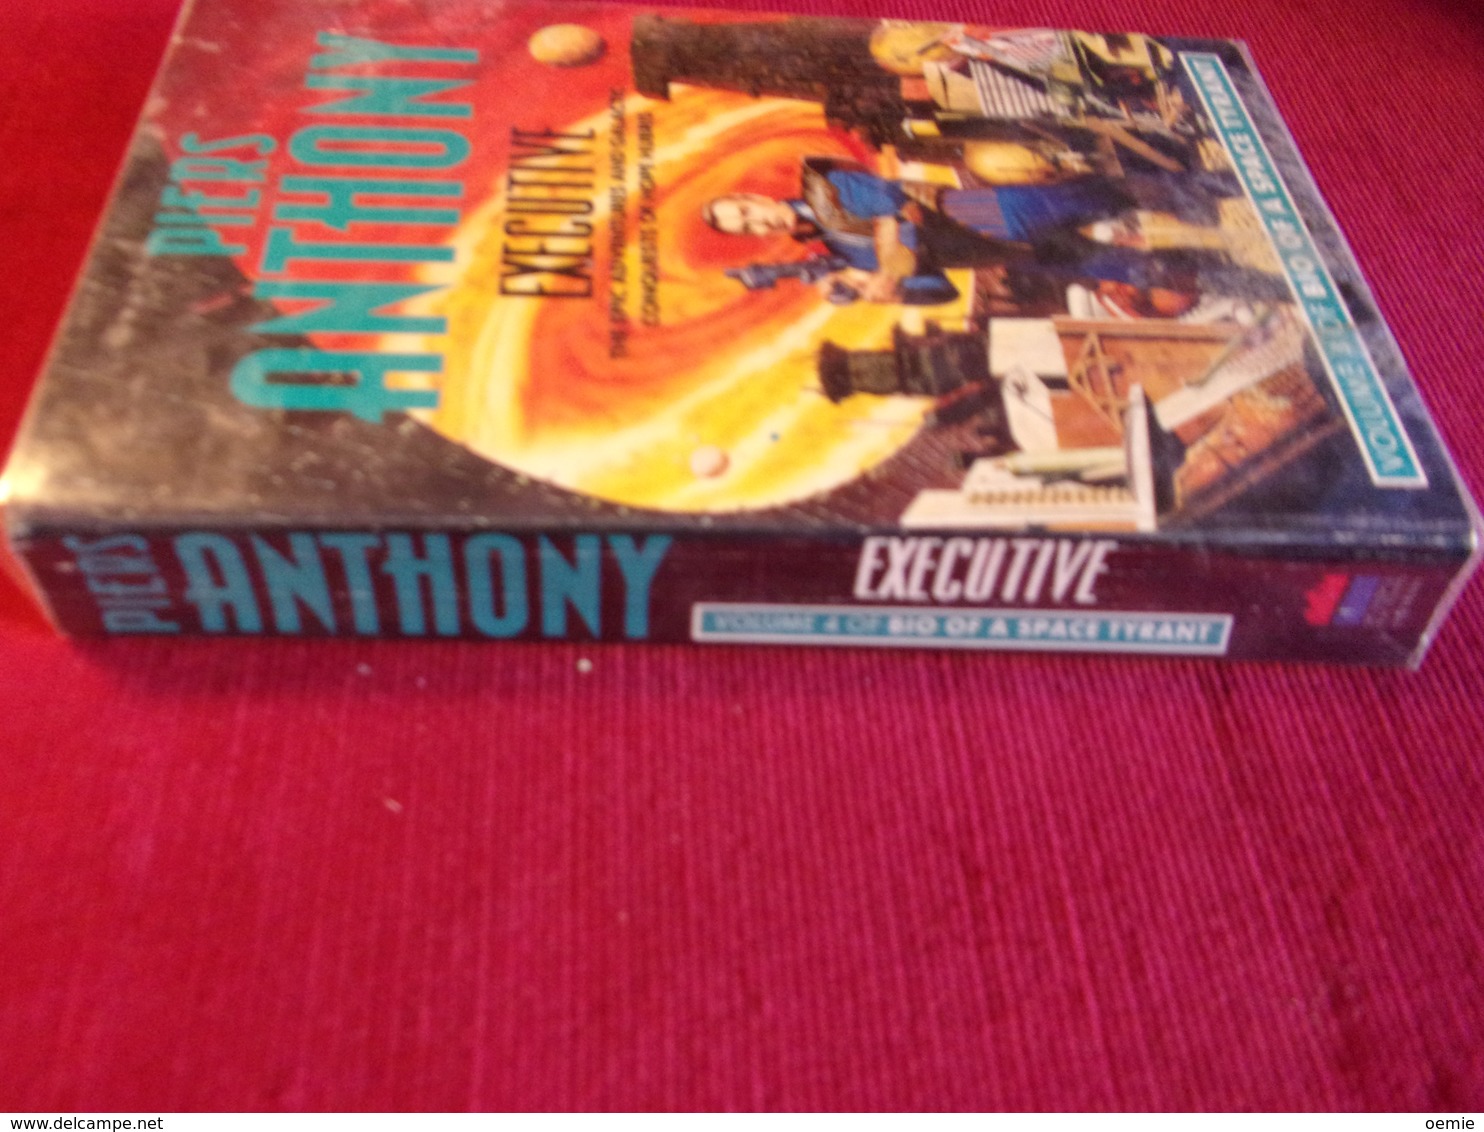 EXECUTIVE  VOLUME 4  °°°° PIERS ANTHONY - Sciencefiction